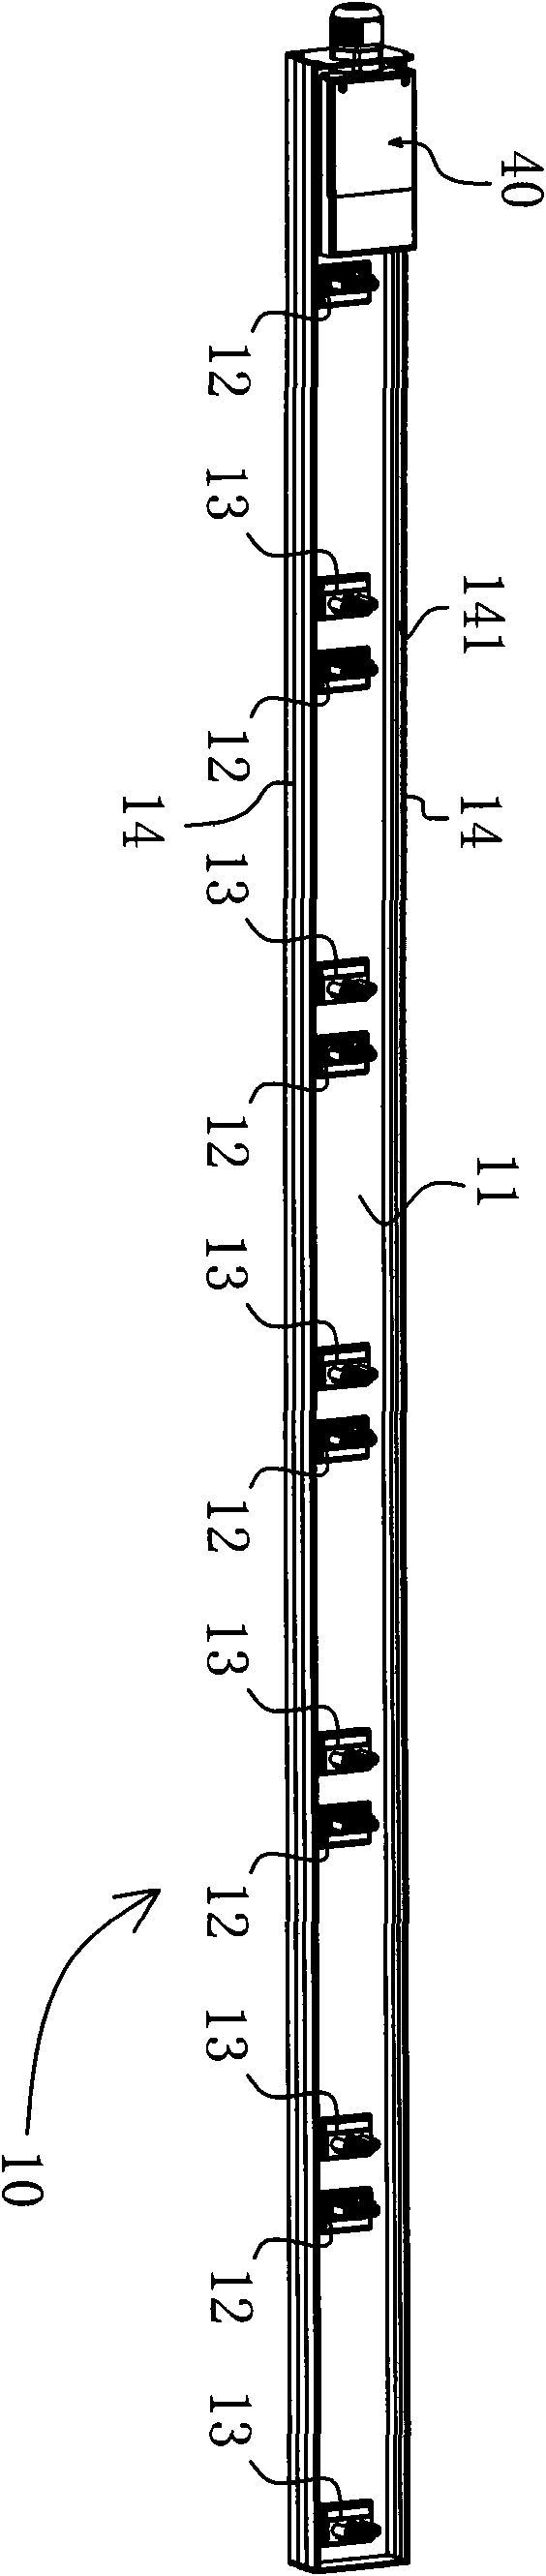 Modularized power control and distribution system